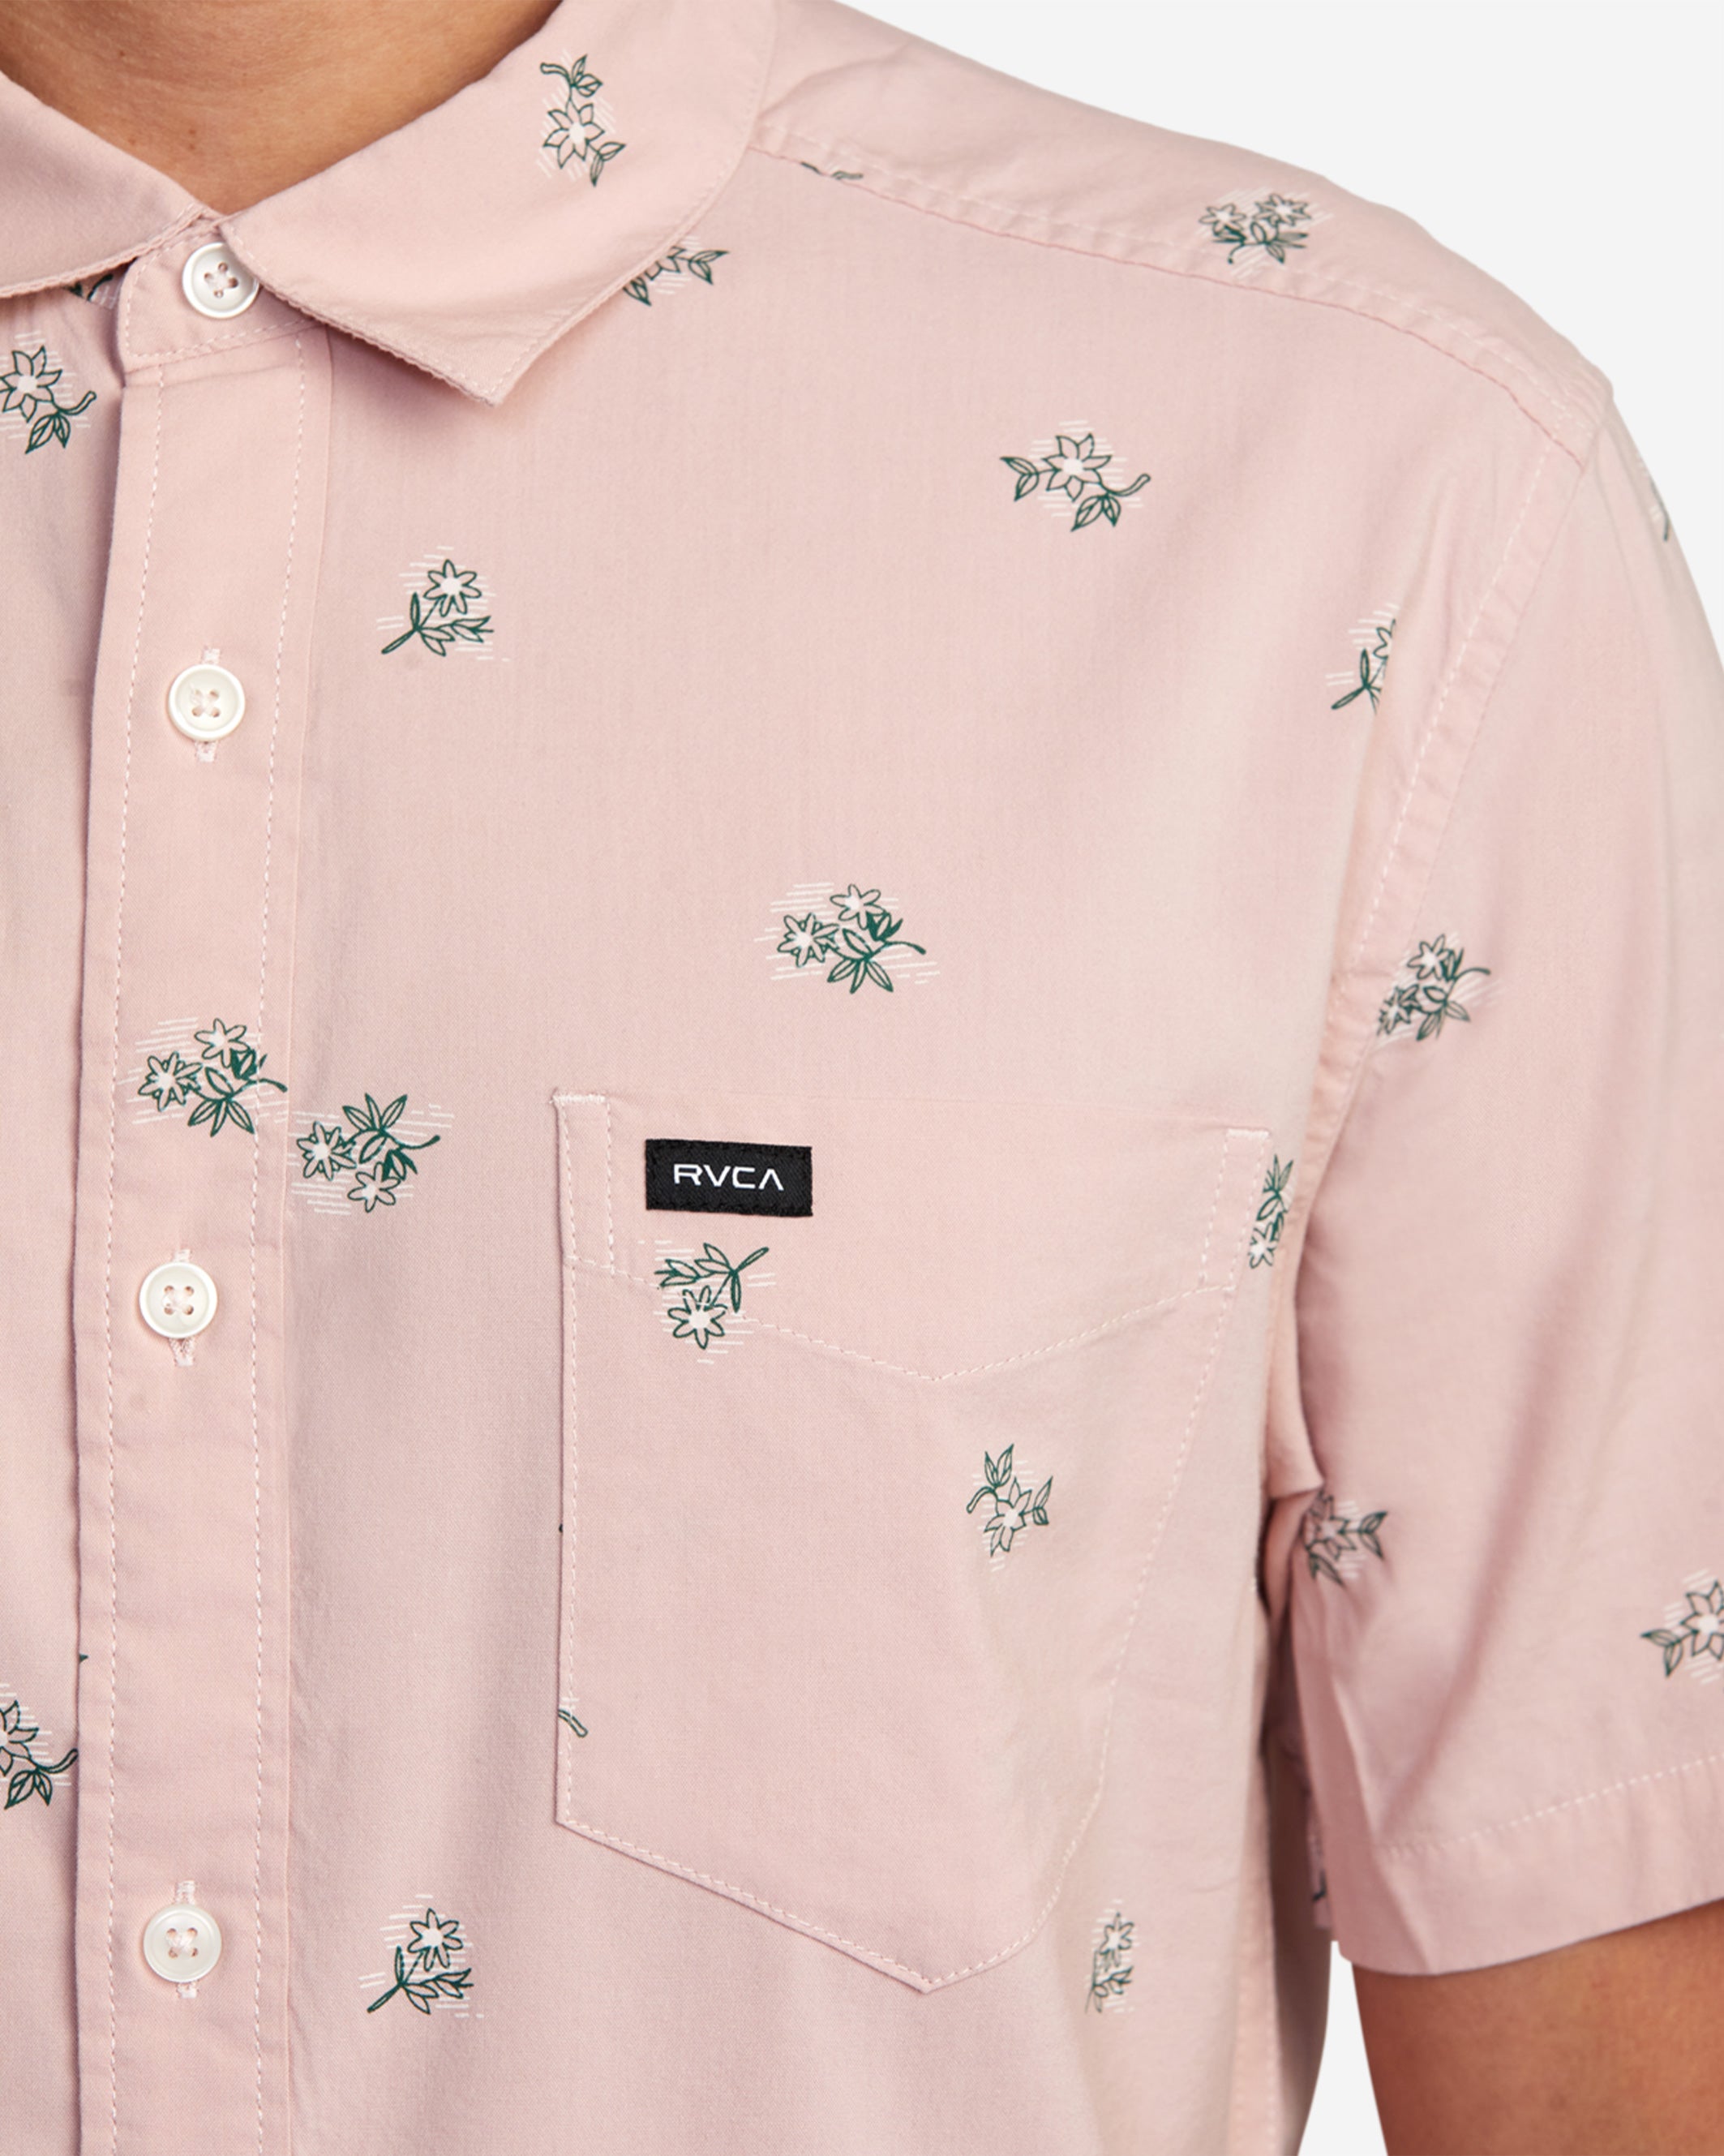 Elevating a classic silhouette with a floral print, this woven button-down shirt is made of cotton-viscose fabric in a regular fit with a chest pocket and a scalloped hem.